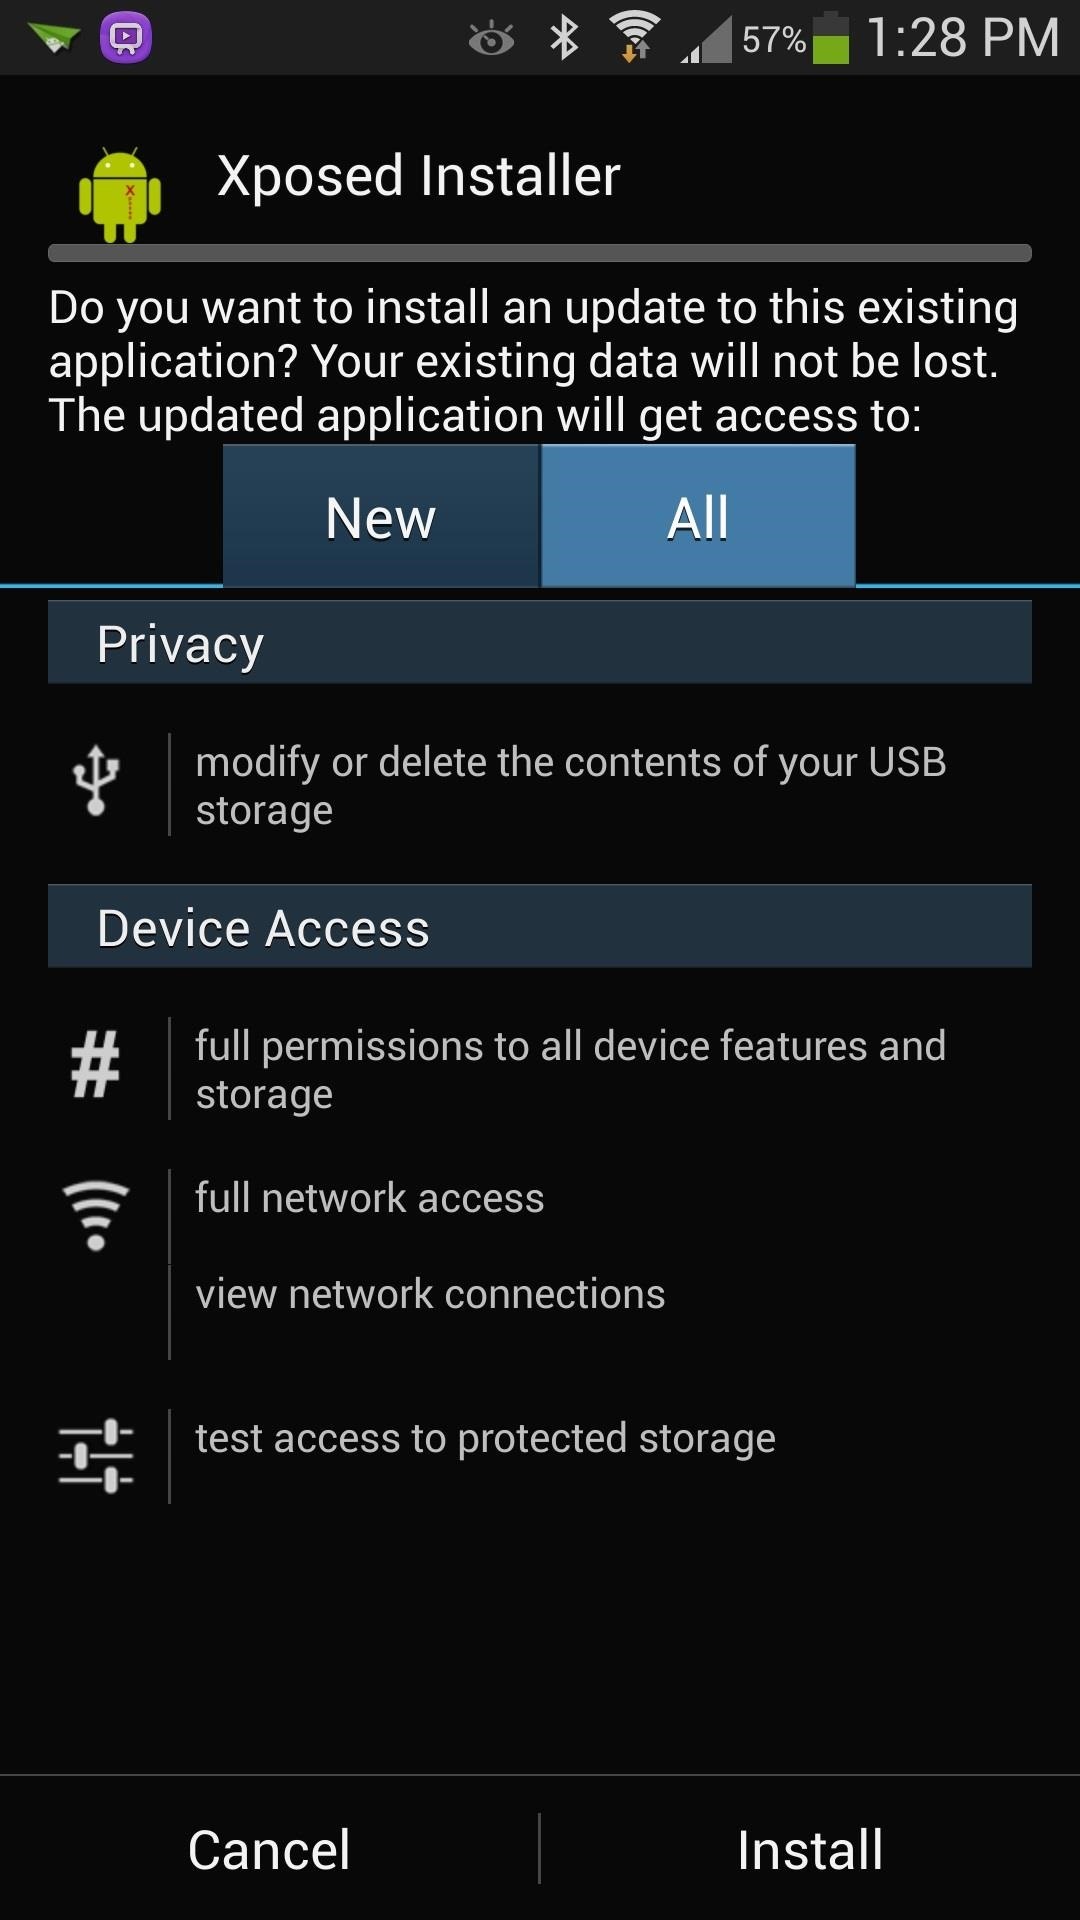 How to Install the Xposed Framework on Your Samsung Galaxy S4 for Quick & Easy softModding